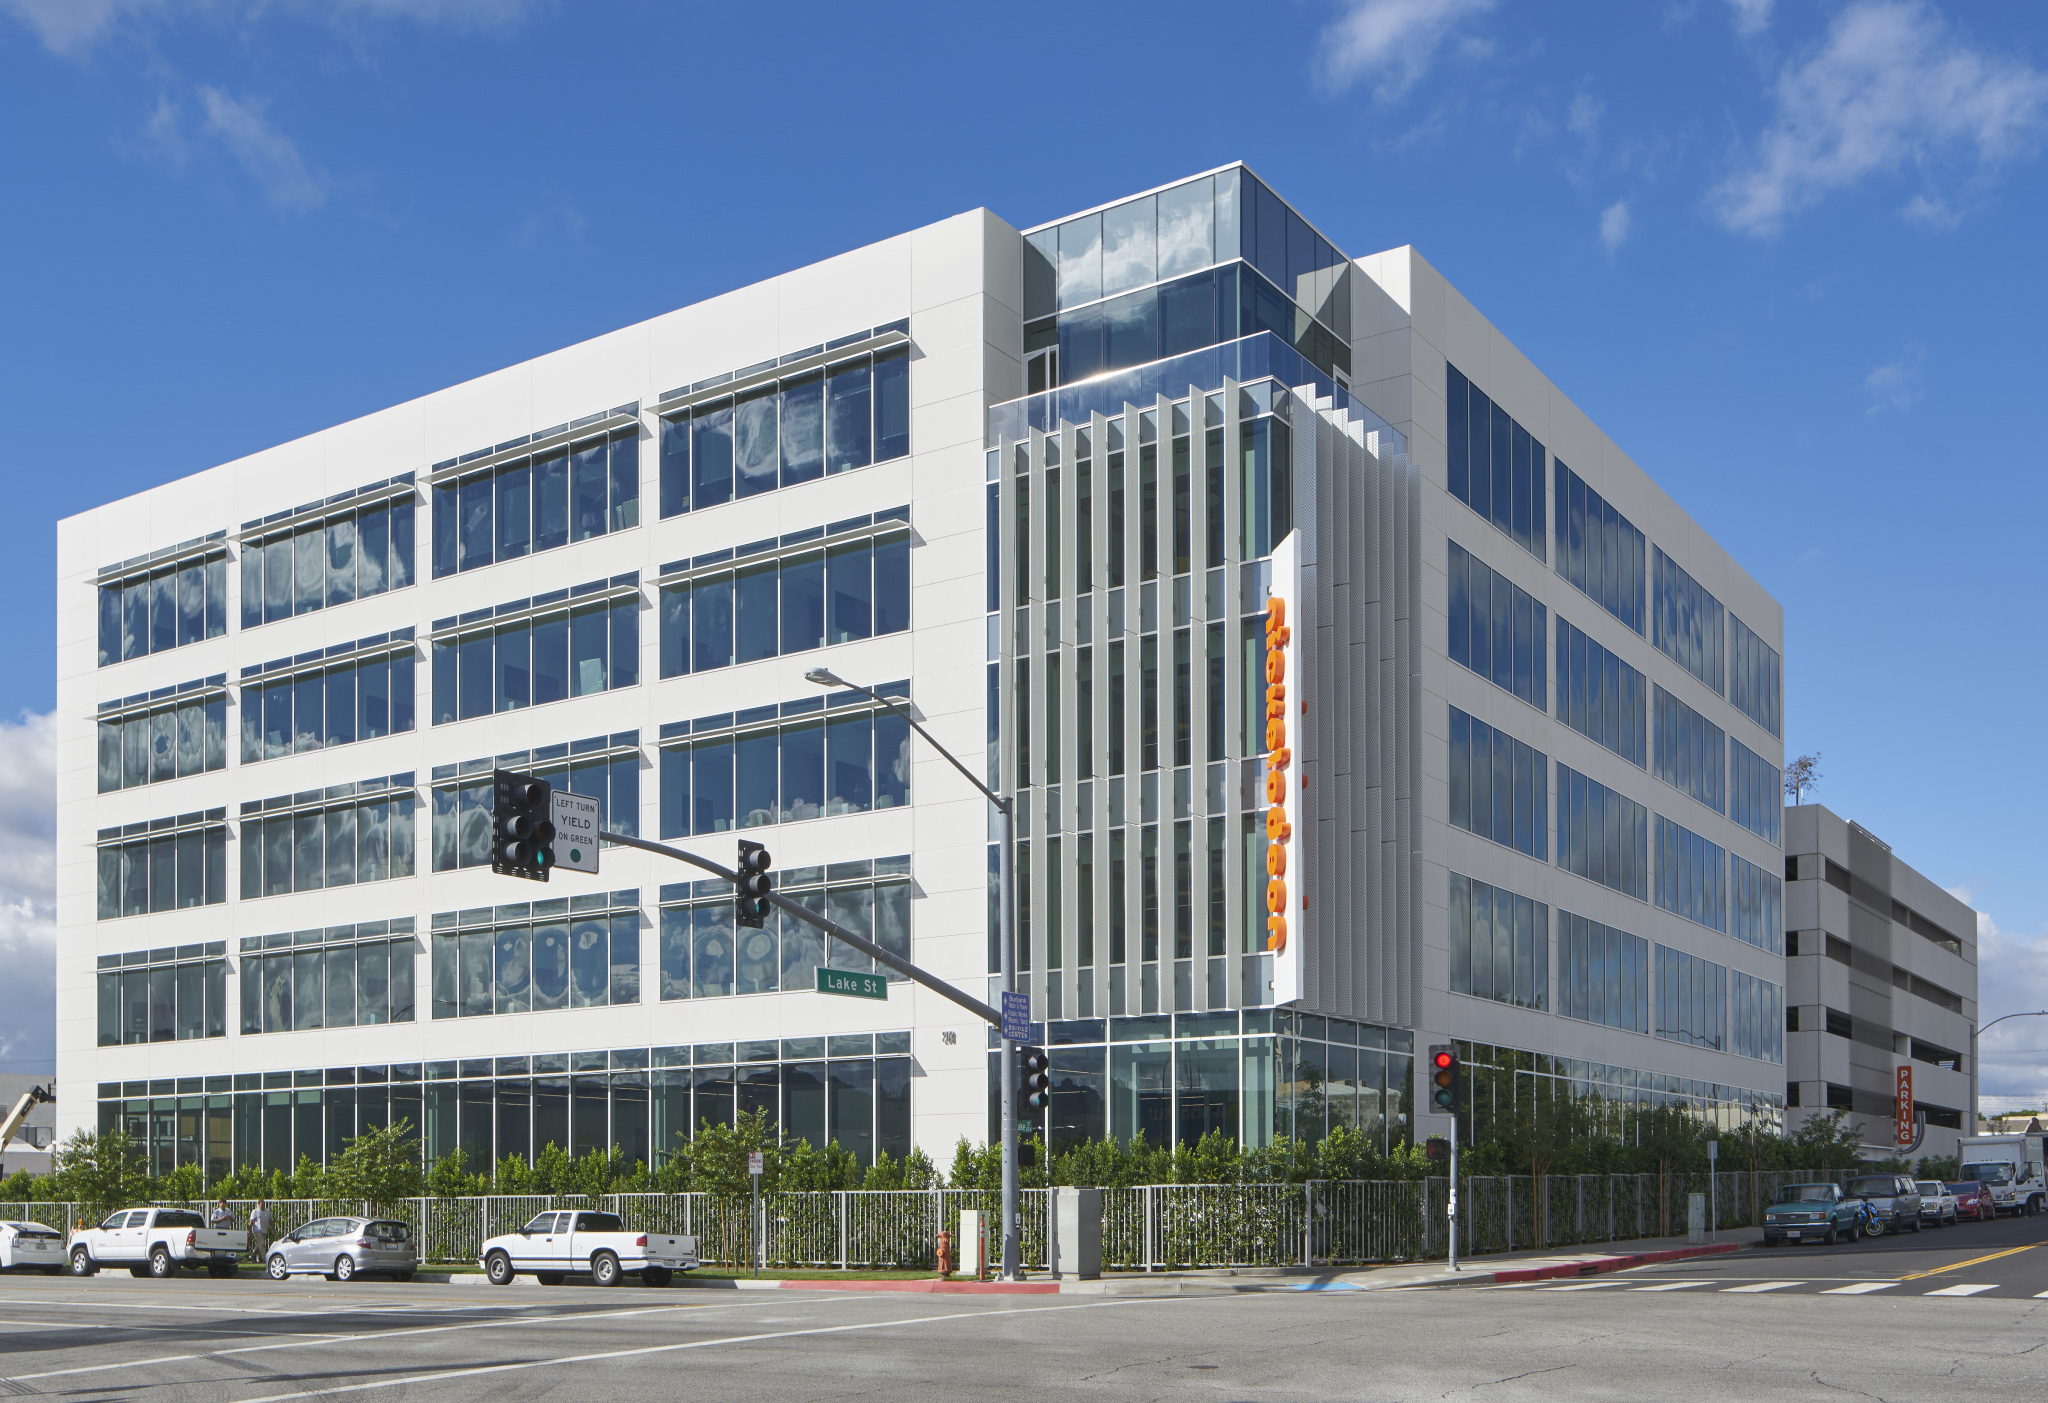 McCormick Completes Nickelodeon Animation Building Facelift - Commercial  Property Executive